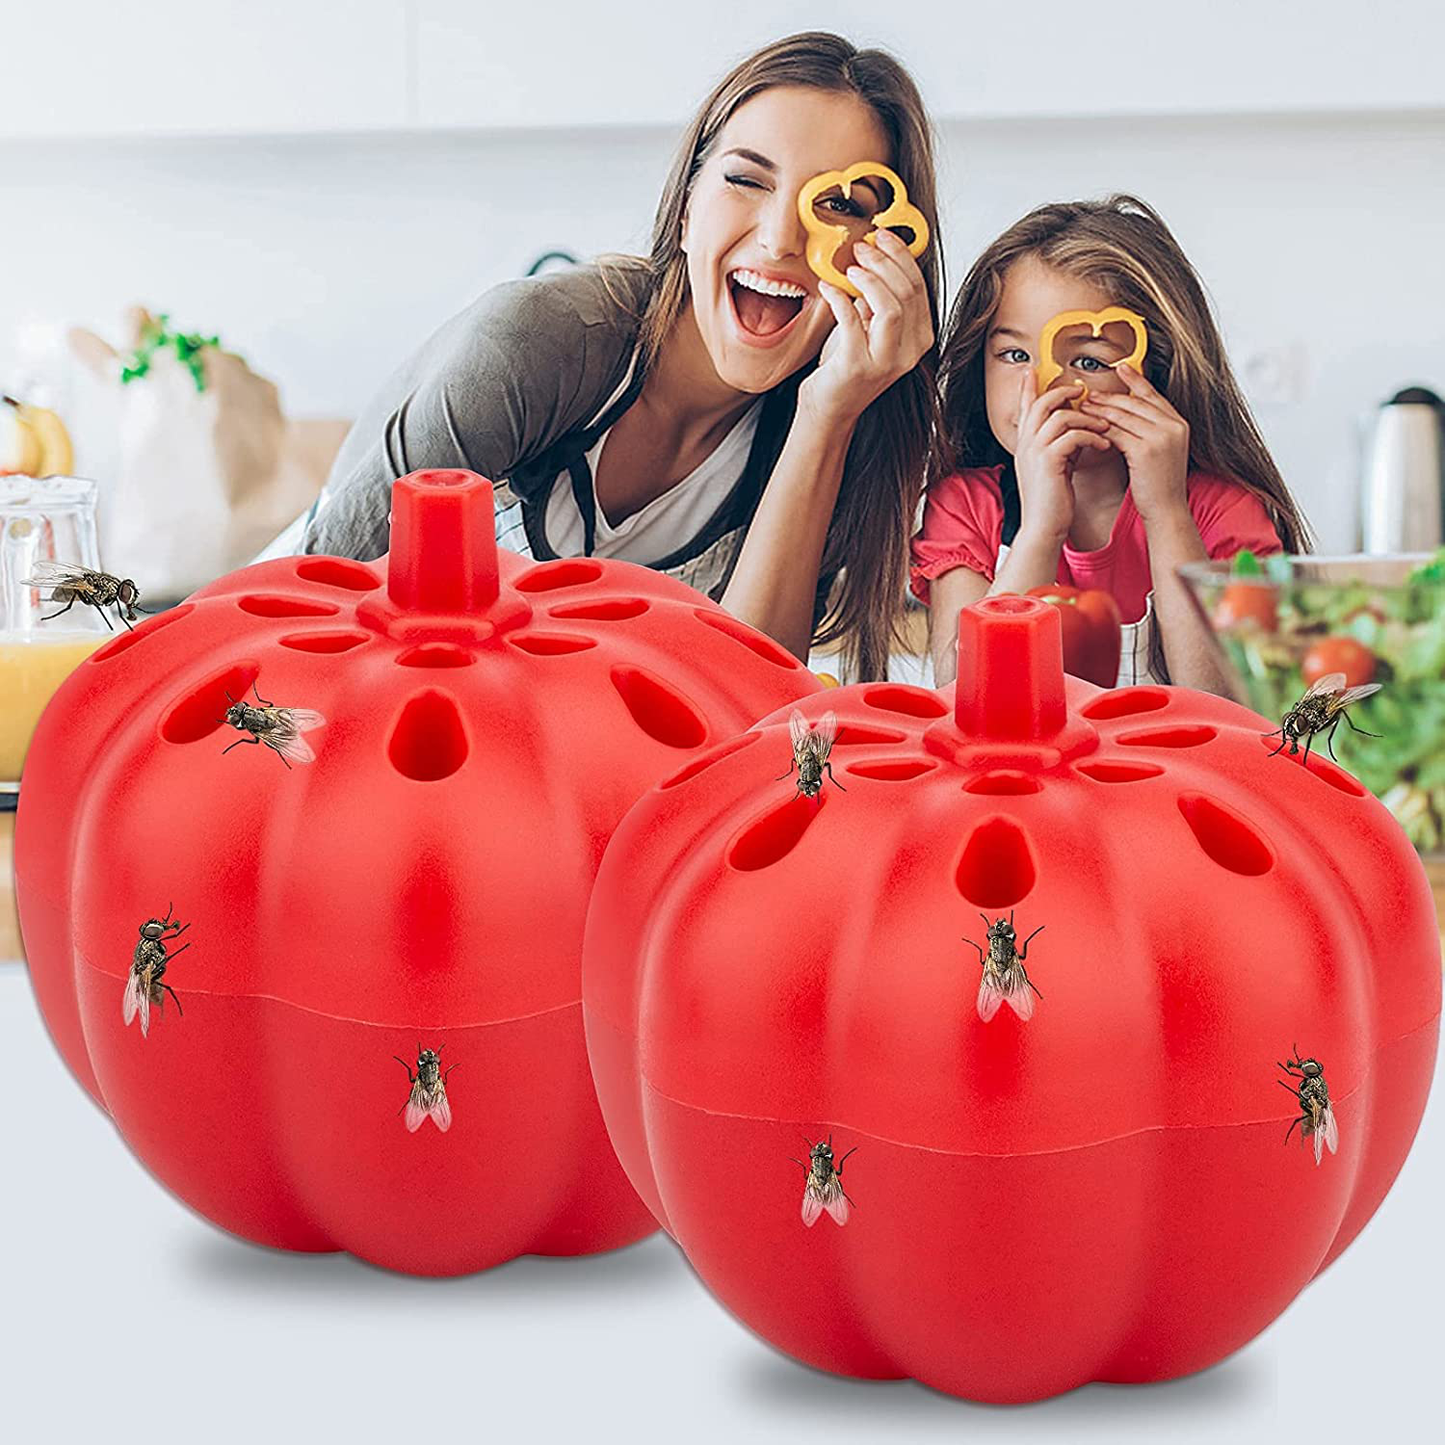 Allinall Fruit Fly Trap,Effective Gnats Trap Indoor Fruit Fly Killer,Easy to Use & Safe Non-Toxic Lure Fly Catcher and Gnat Killer for Indoor/Home/Kitchen/Dining Areas Pumpkin Shape 2 Pack Frosted